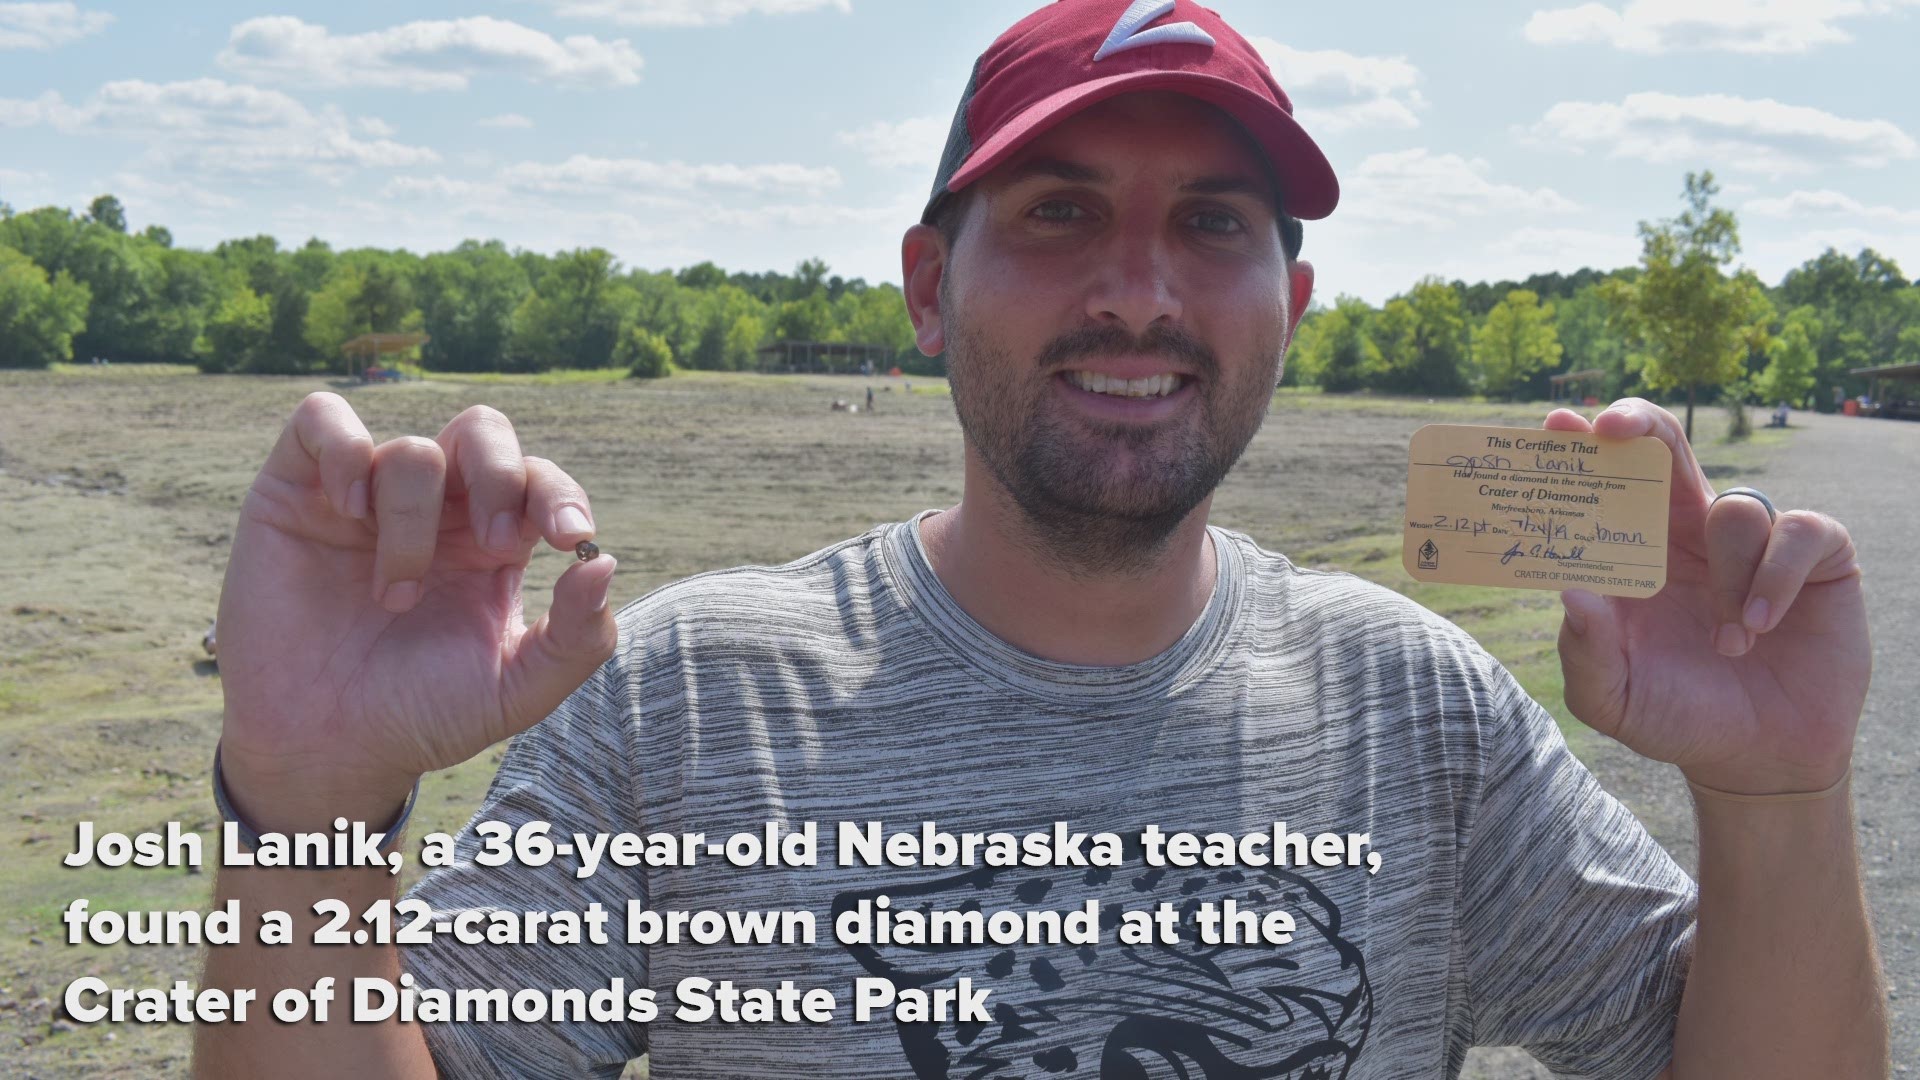 The teacher named the diamond after his family and they plan to keep it for the time being.